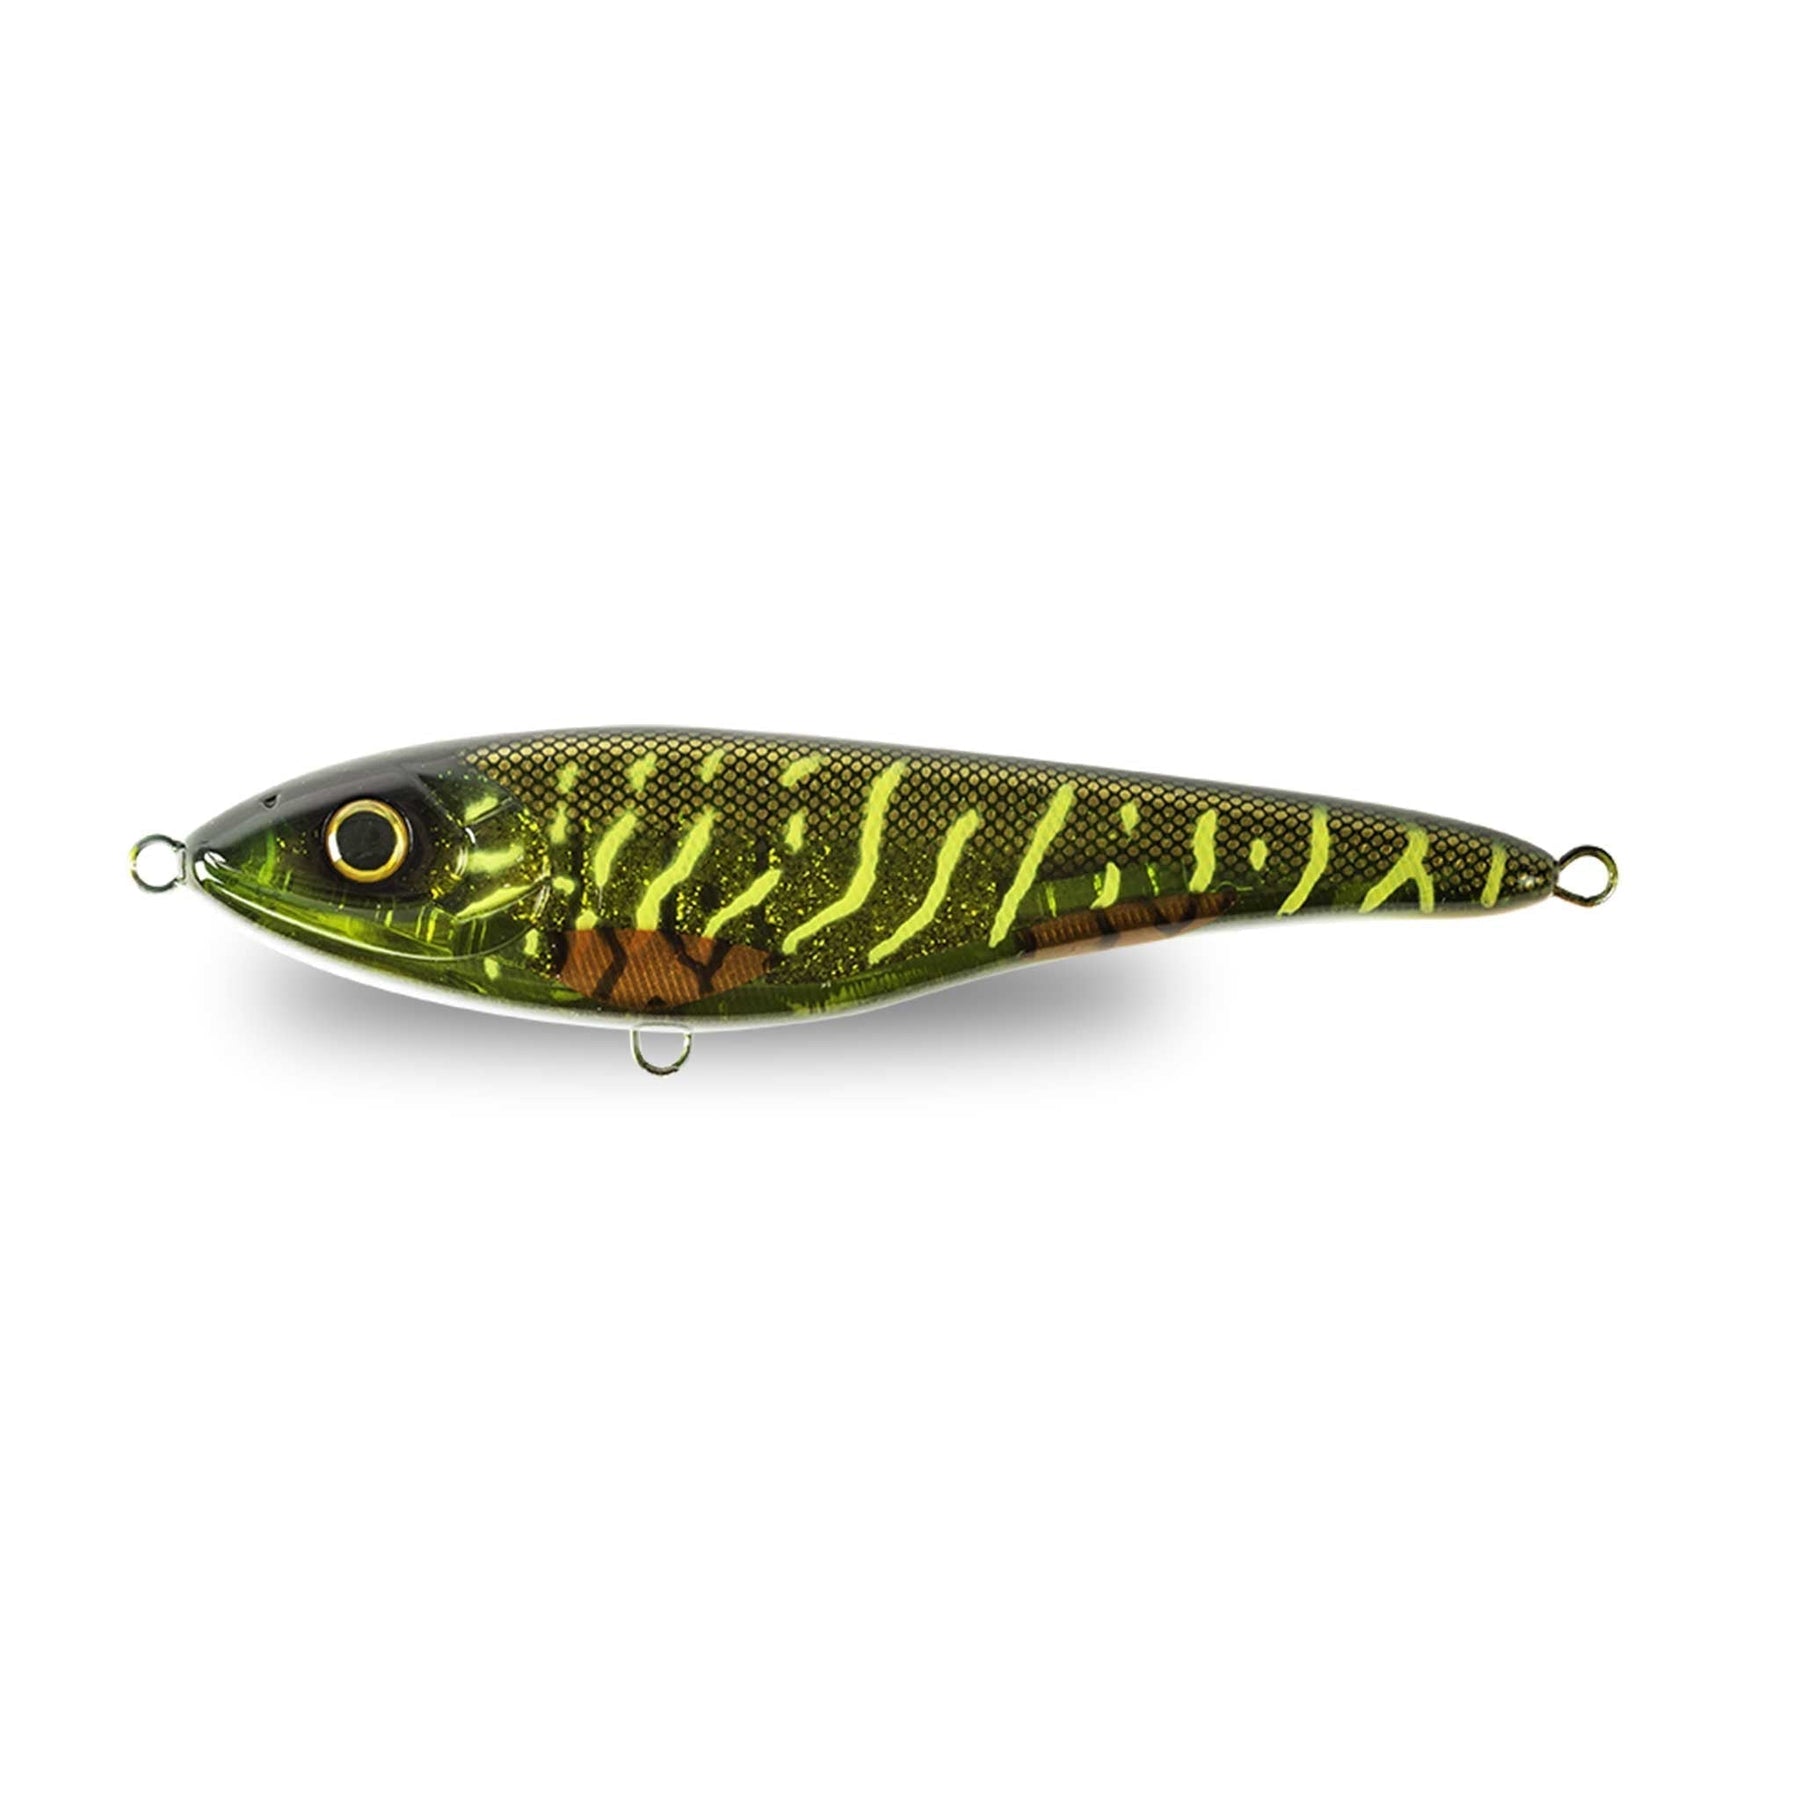 Strike Pro Big Bandit Slow Sink Glide Bait | Pike & Musky Lures Natural Perch